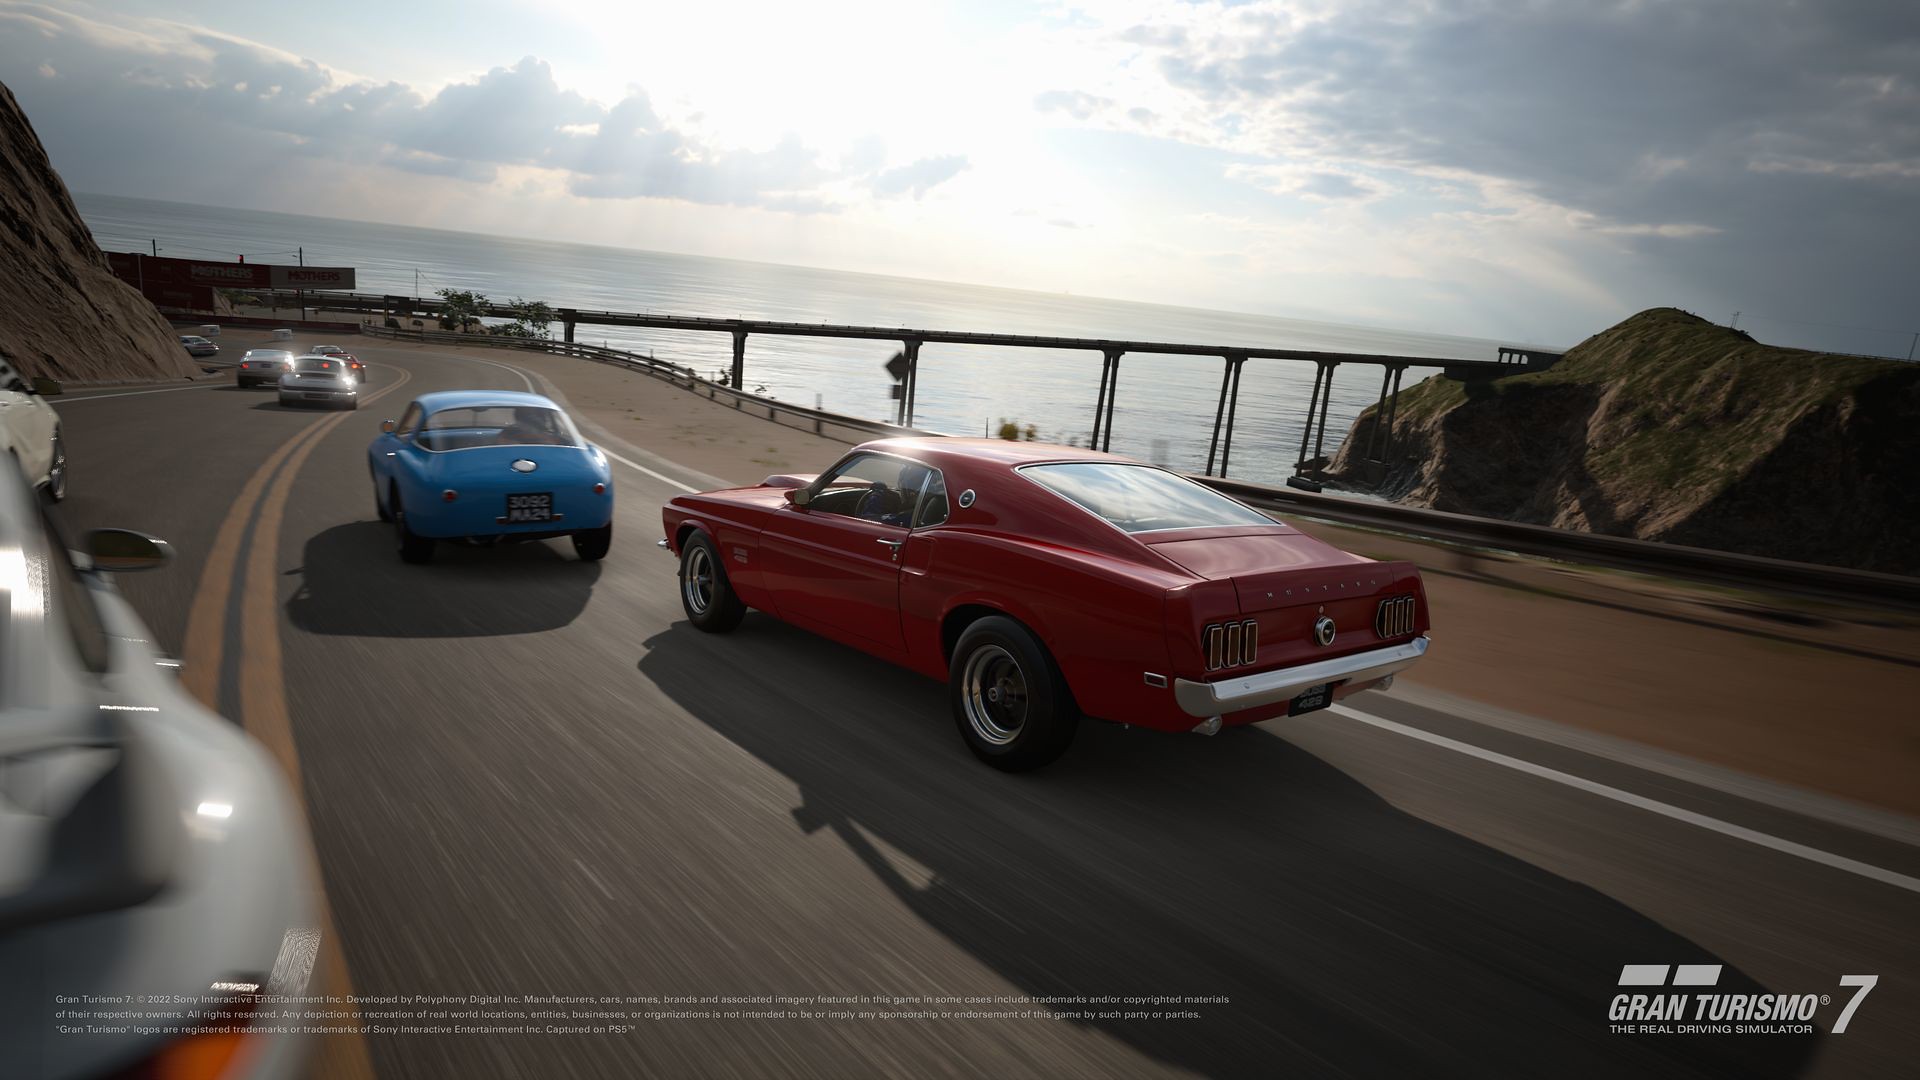 Gran Turismo 7 – Update 1.31 Goes Live Today, Adds 120 FPS Mode